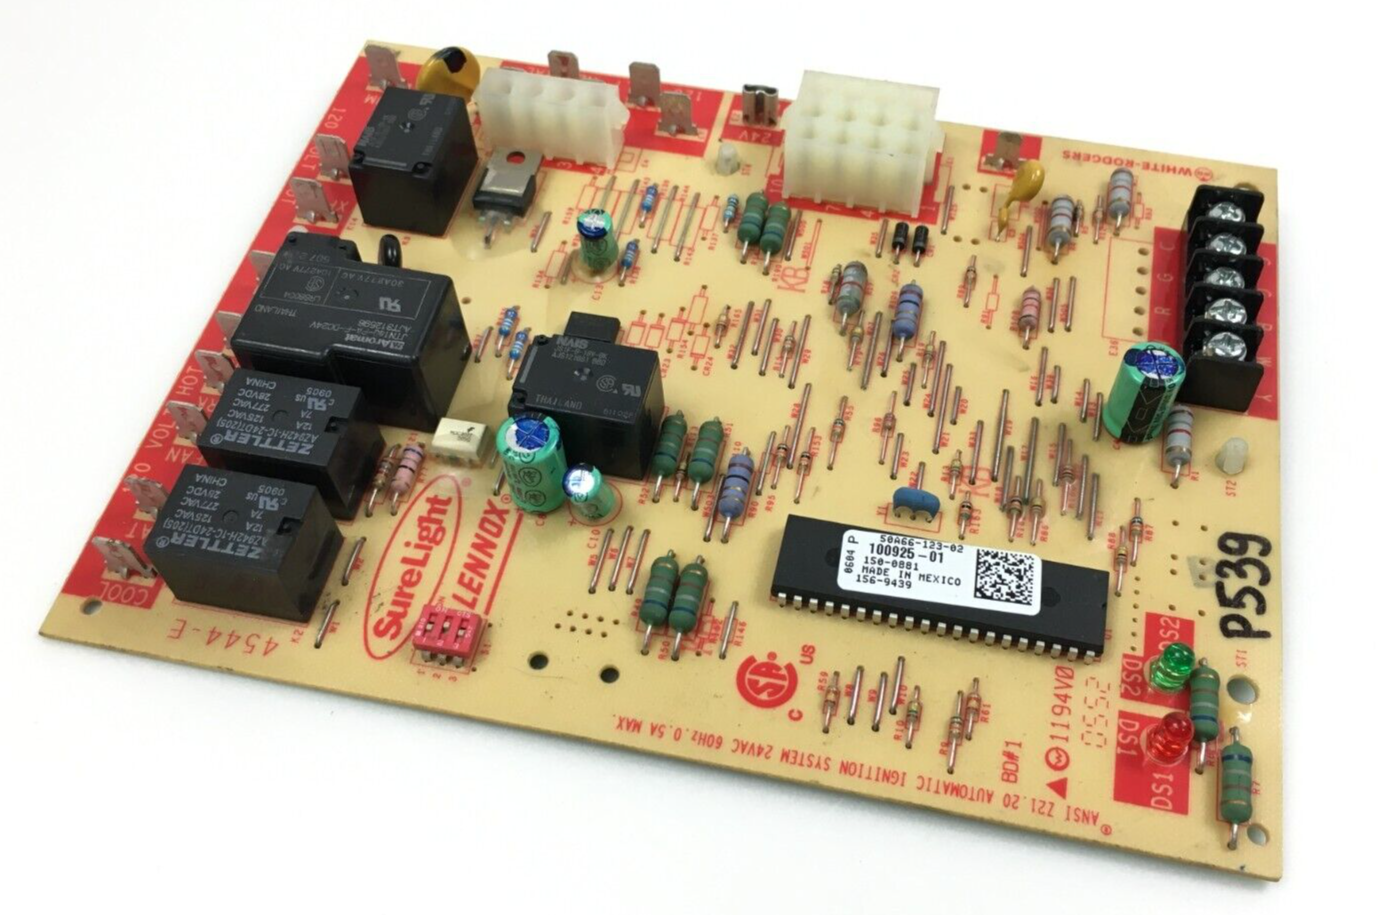 Primary image for LENNOX 50A66-123-02 SureLight WhiteRodgers Control Circuit Board 100925-01 #P539